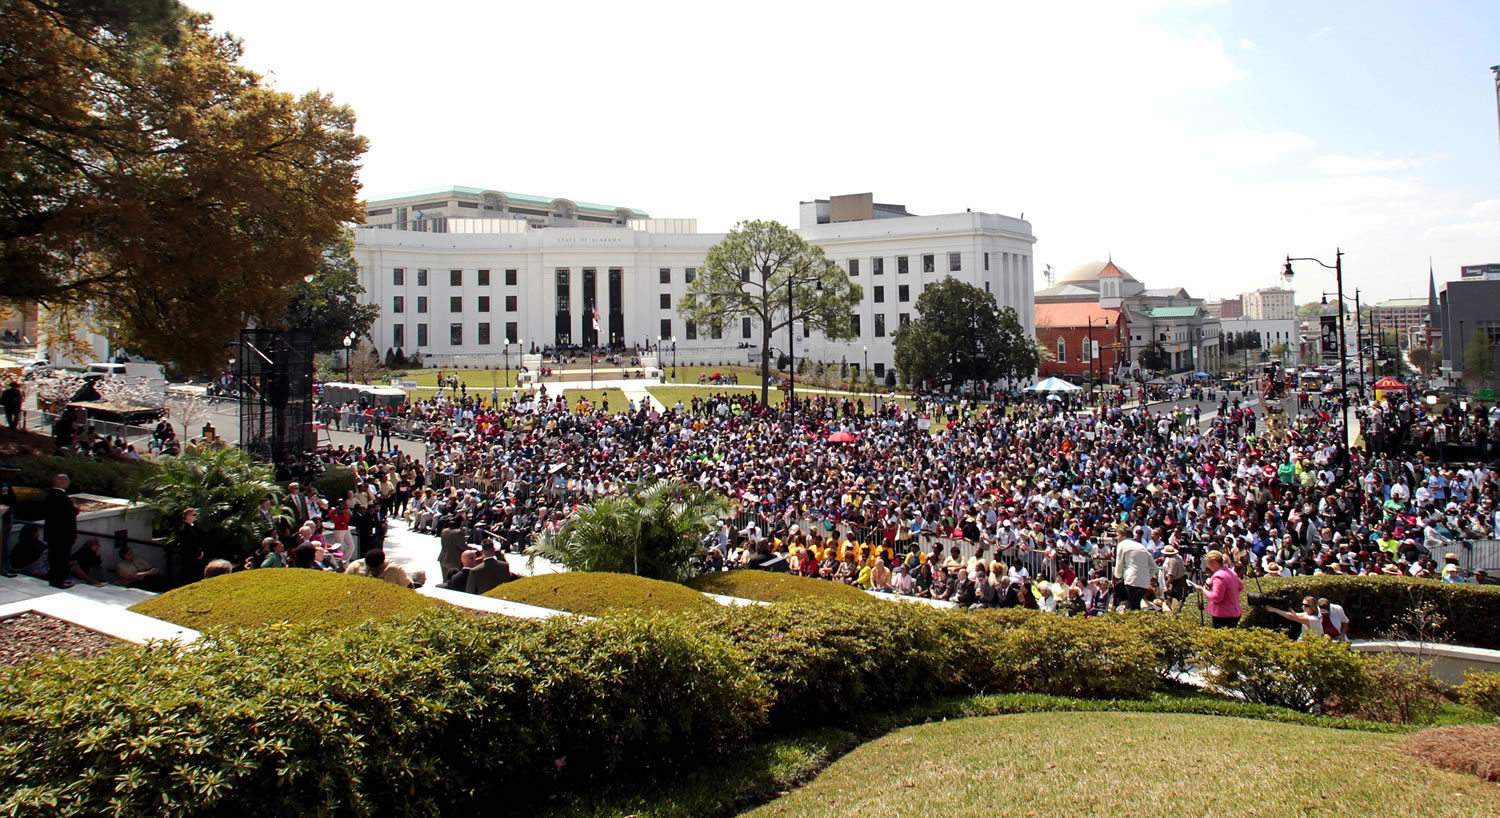 Photos by BUTCH DILL/Associated Press
A crowd gathers Wednesday at the Alabama State Capitol in Montgomery after a march from Selma to mark the anniversary of the 1965 voting rights march.